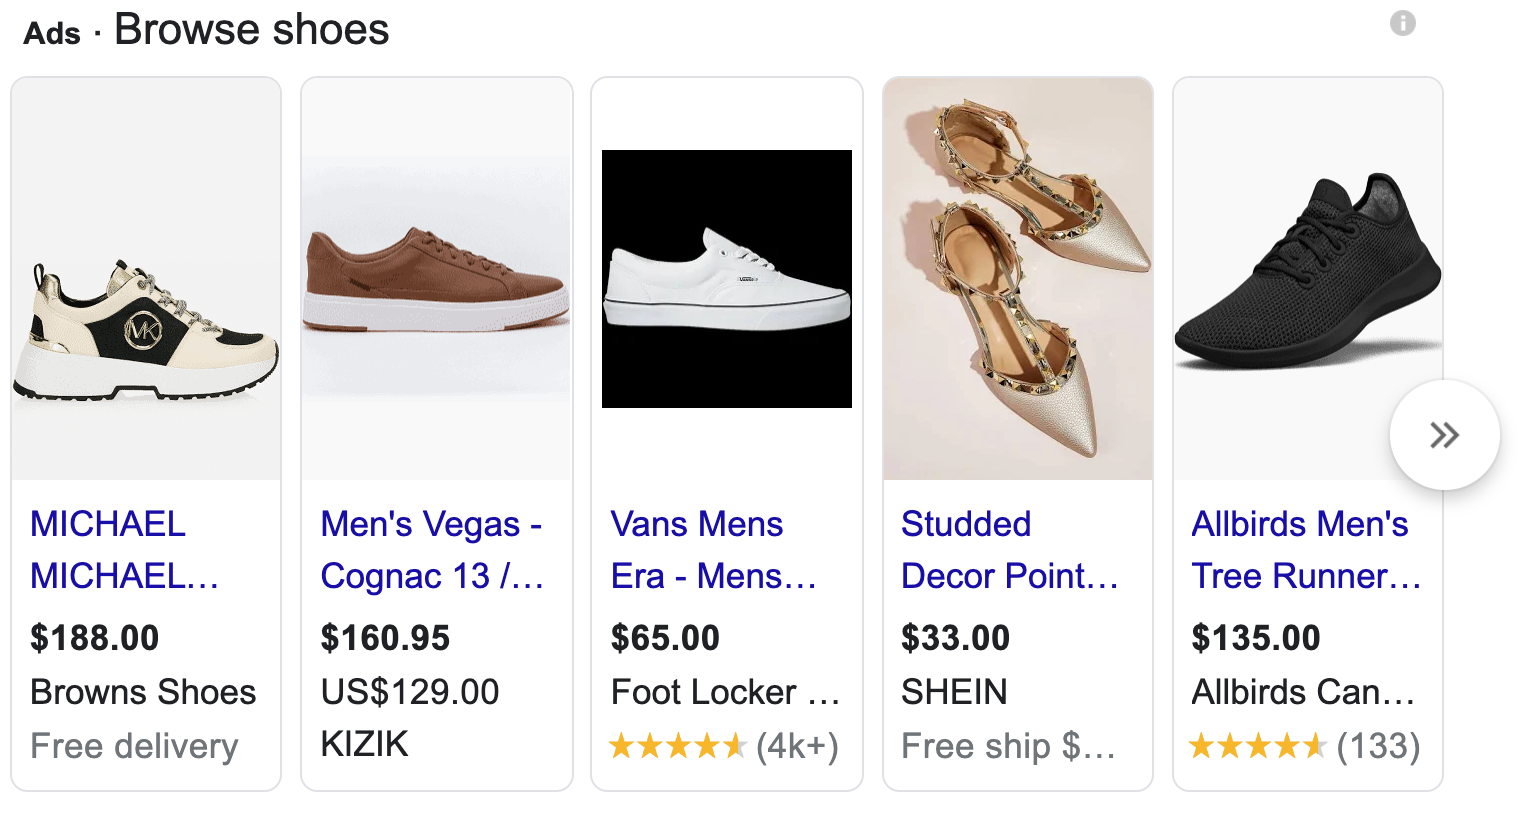 Google Shopping ads about shoes with star ratings present.